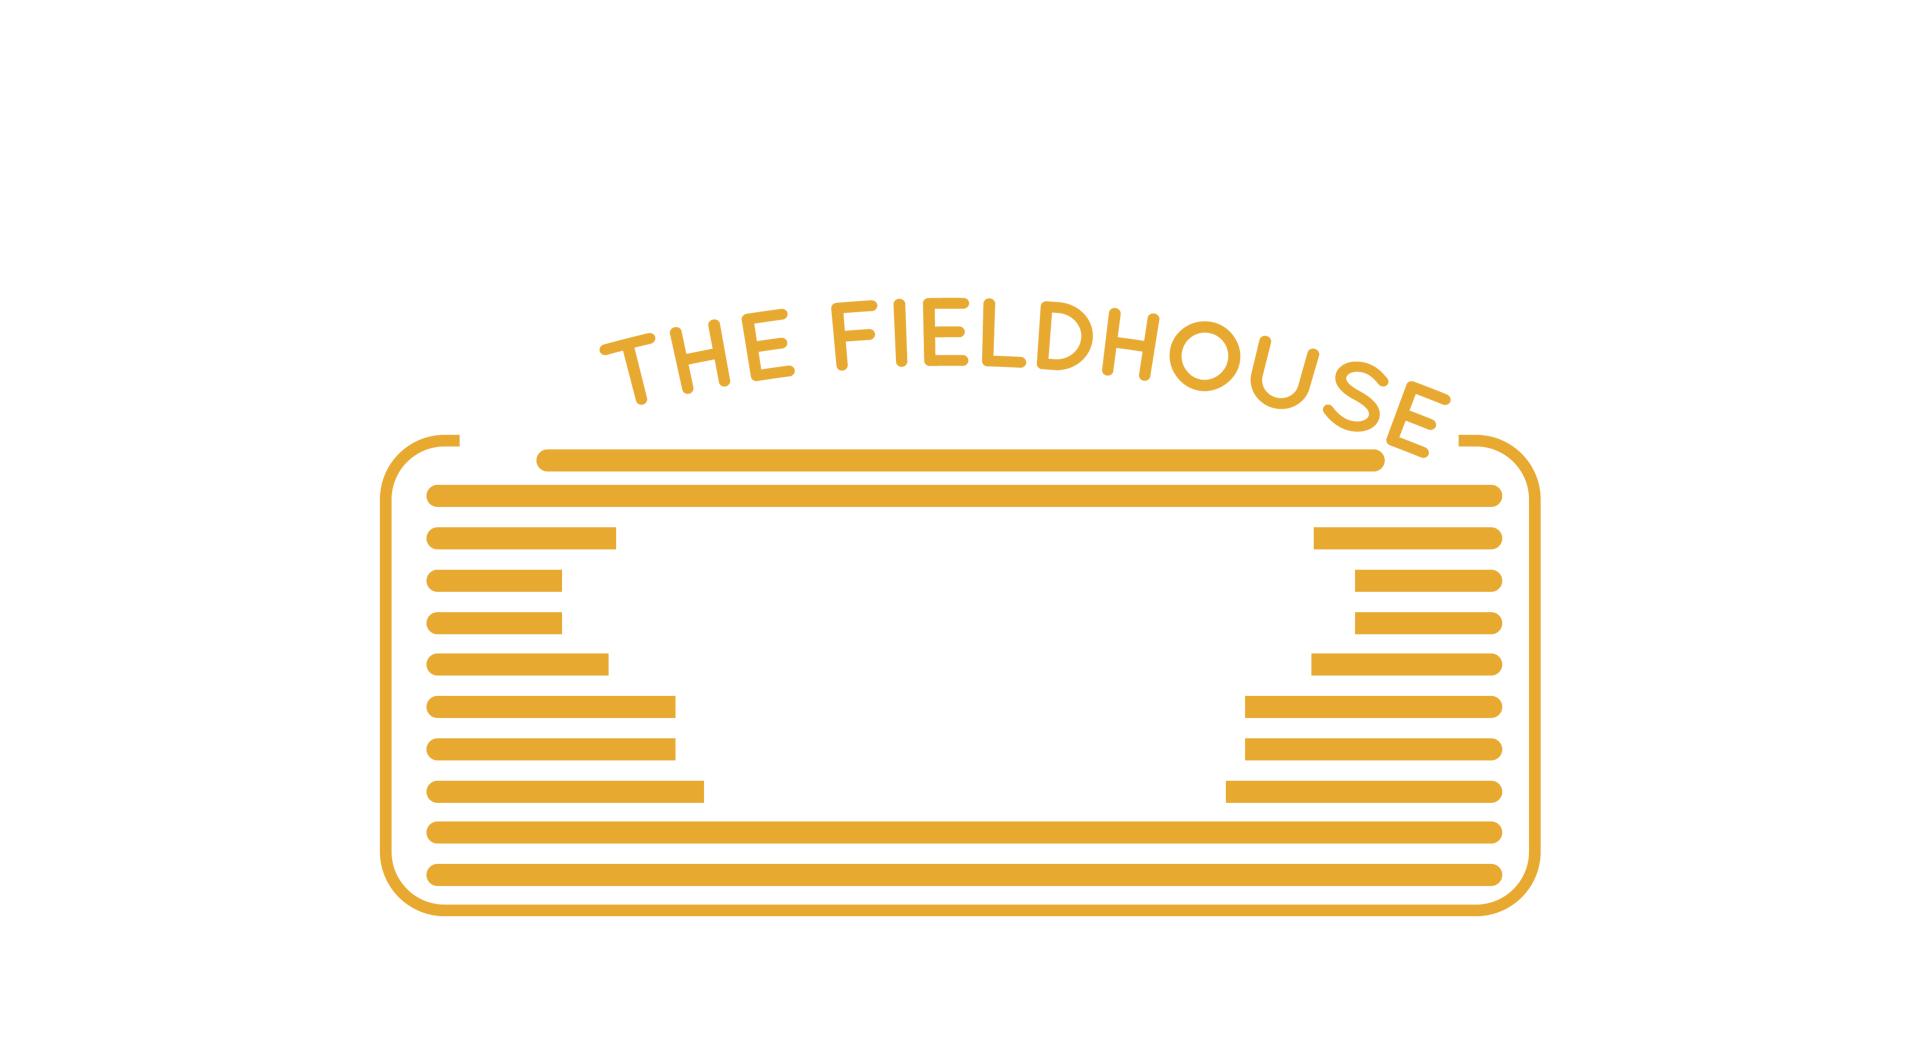 The Big Screen at The Fieldhouse Outdoor Cinema